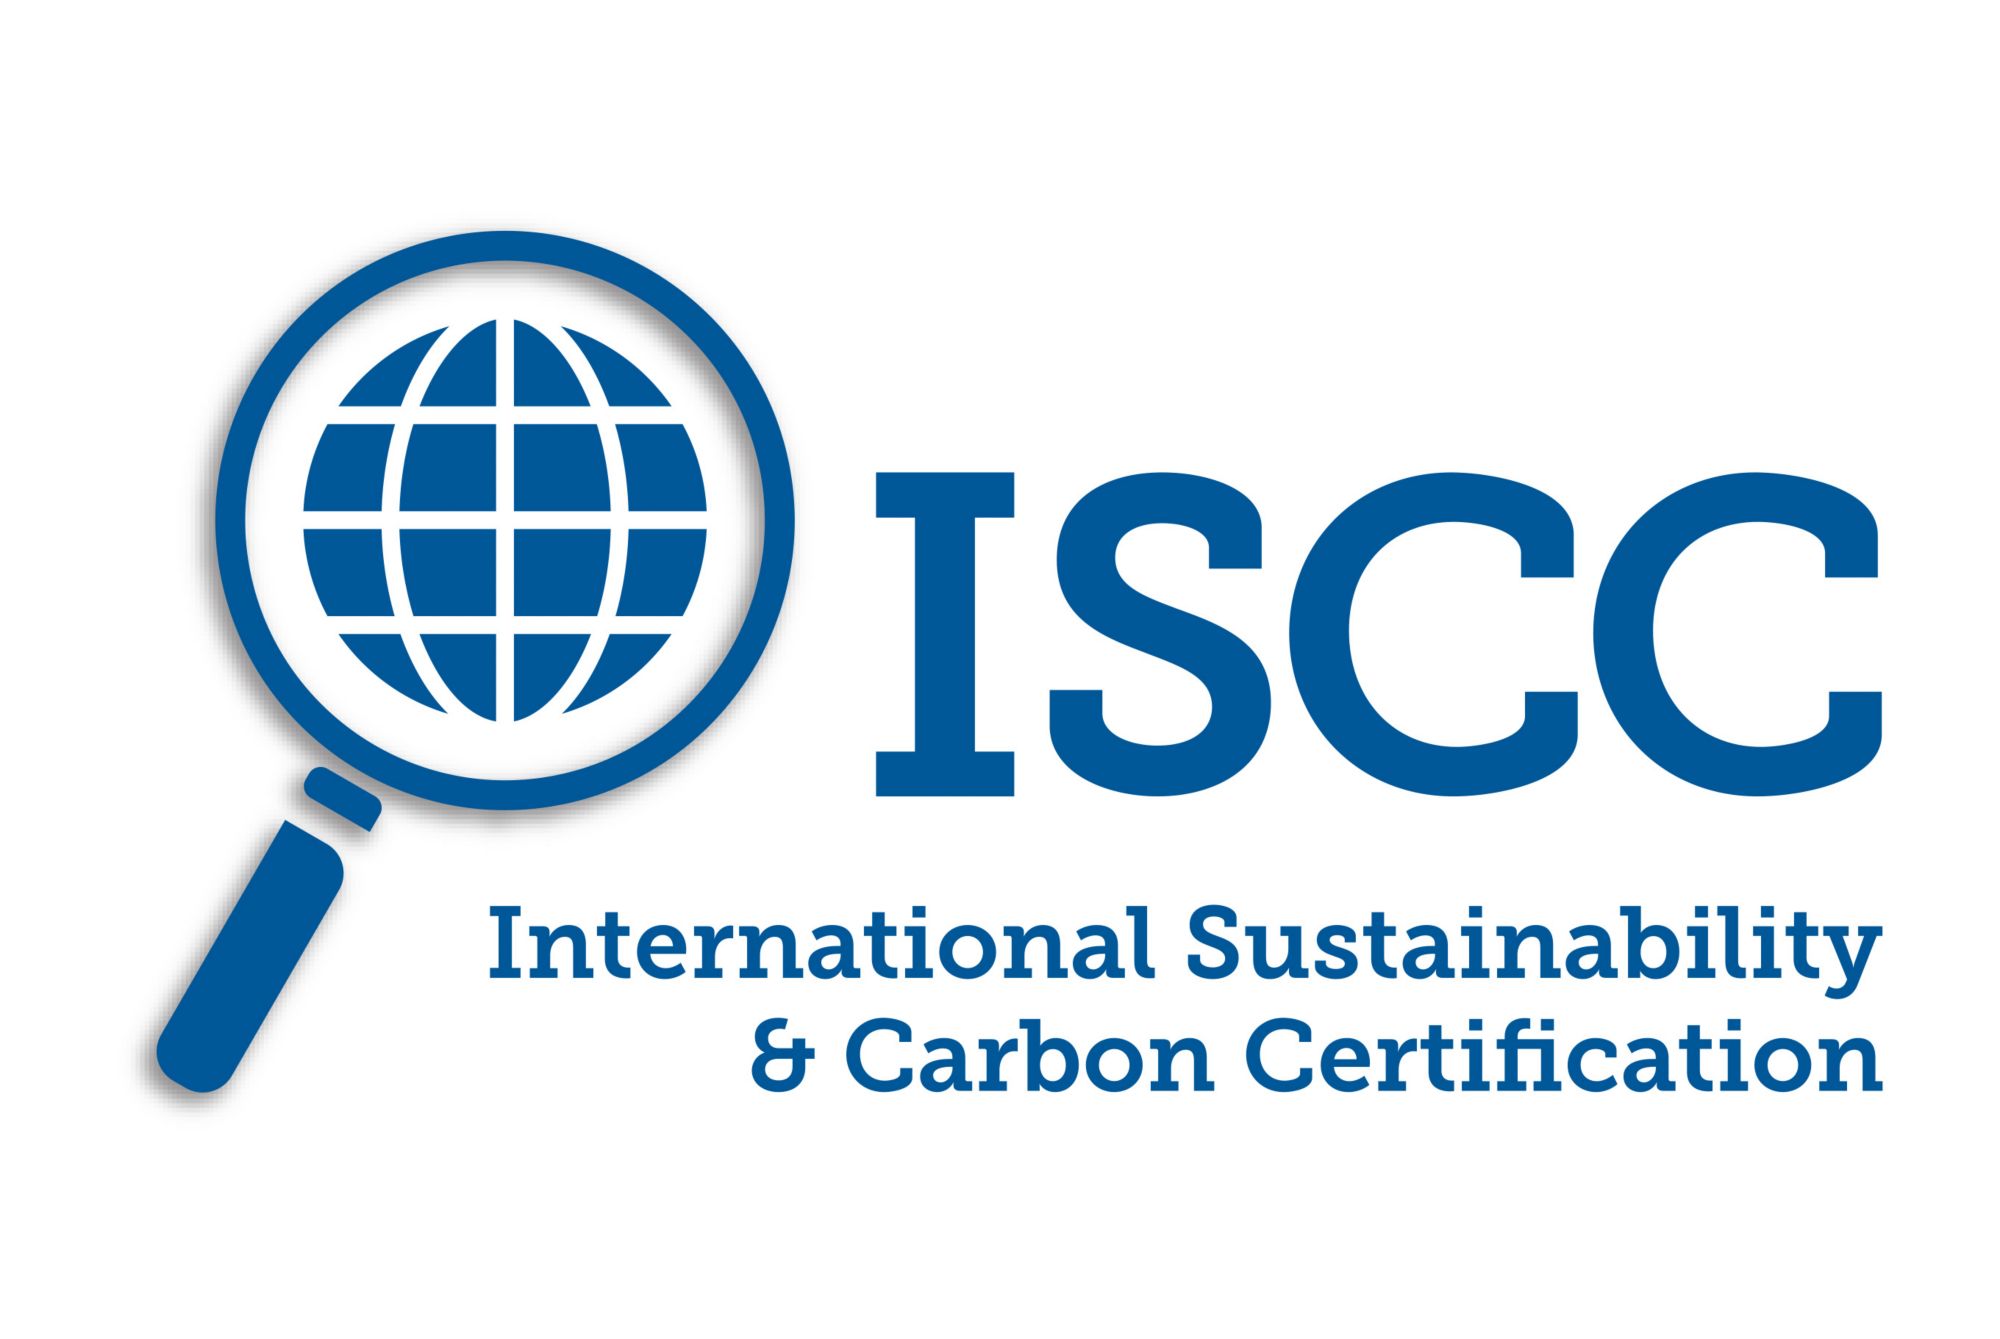 International Sustainability and Carbon Certification (ISCC) logo   